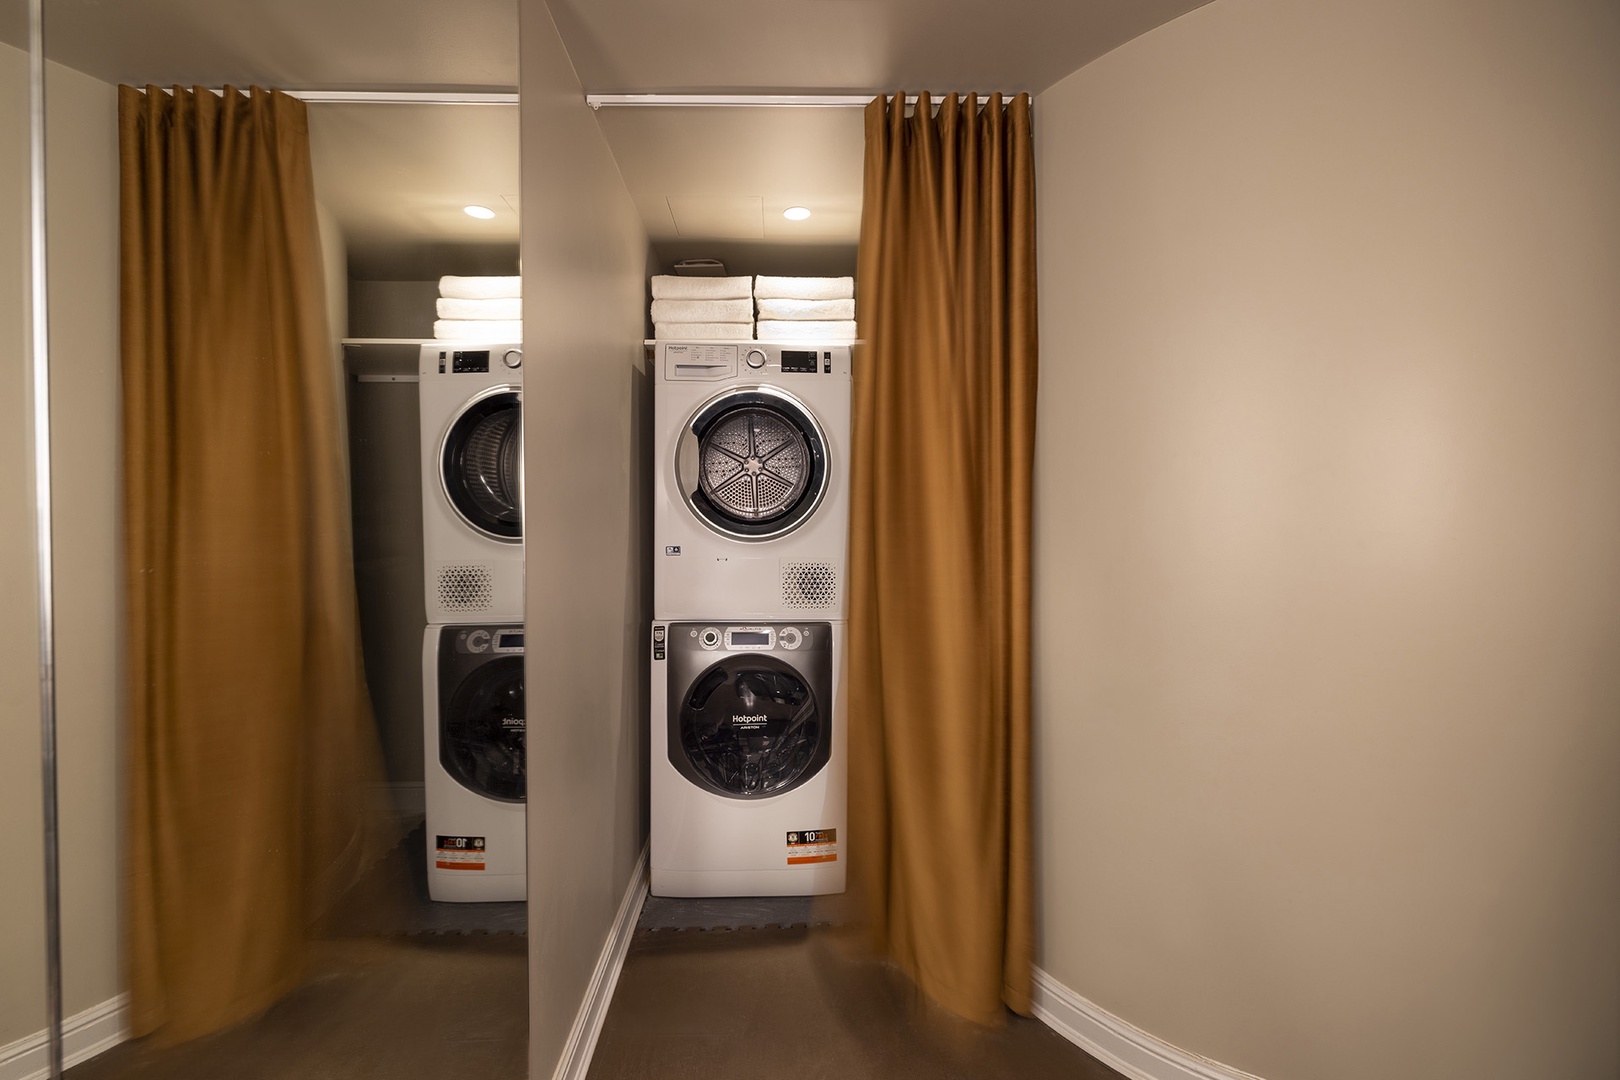 Laundry facilities include washer and separate dryer.